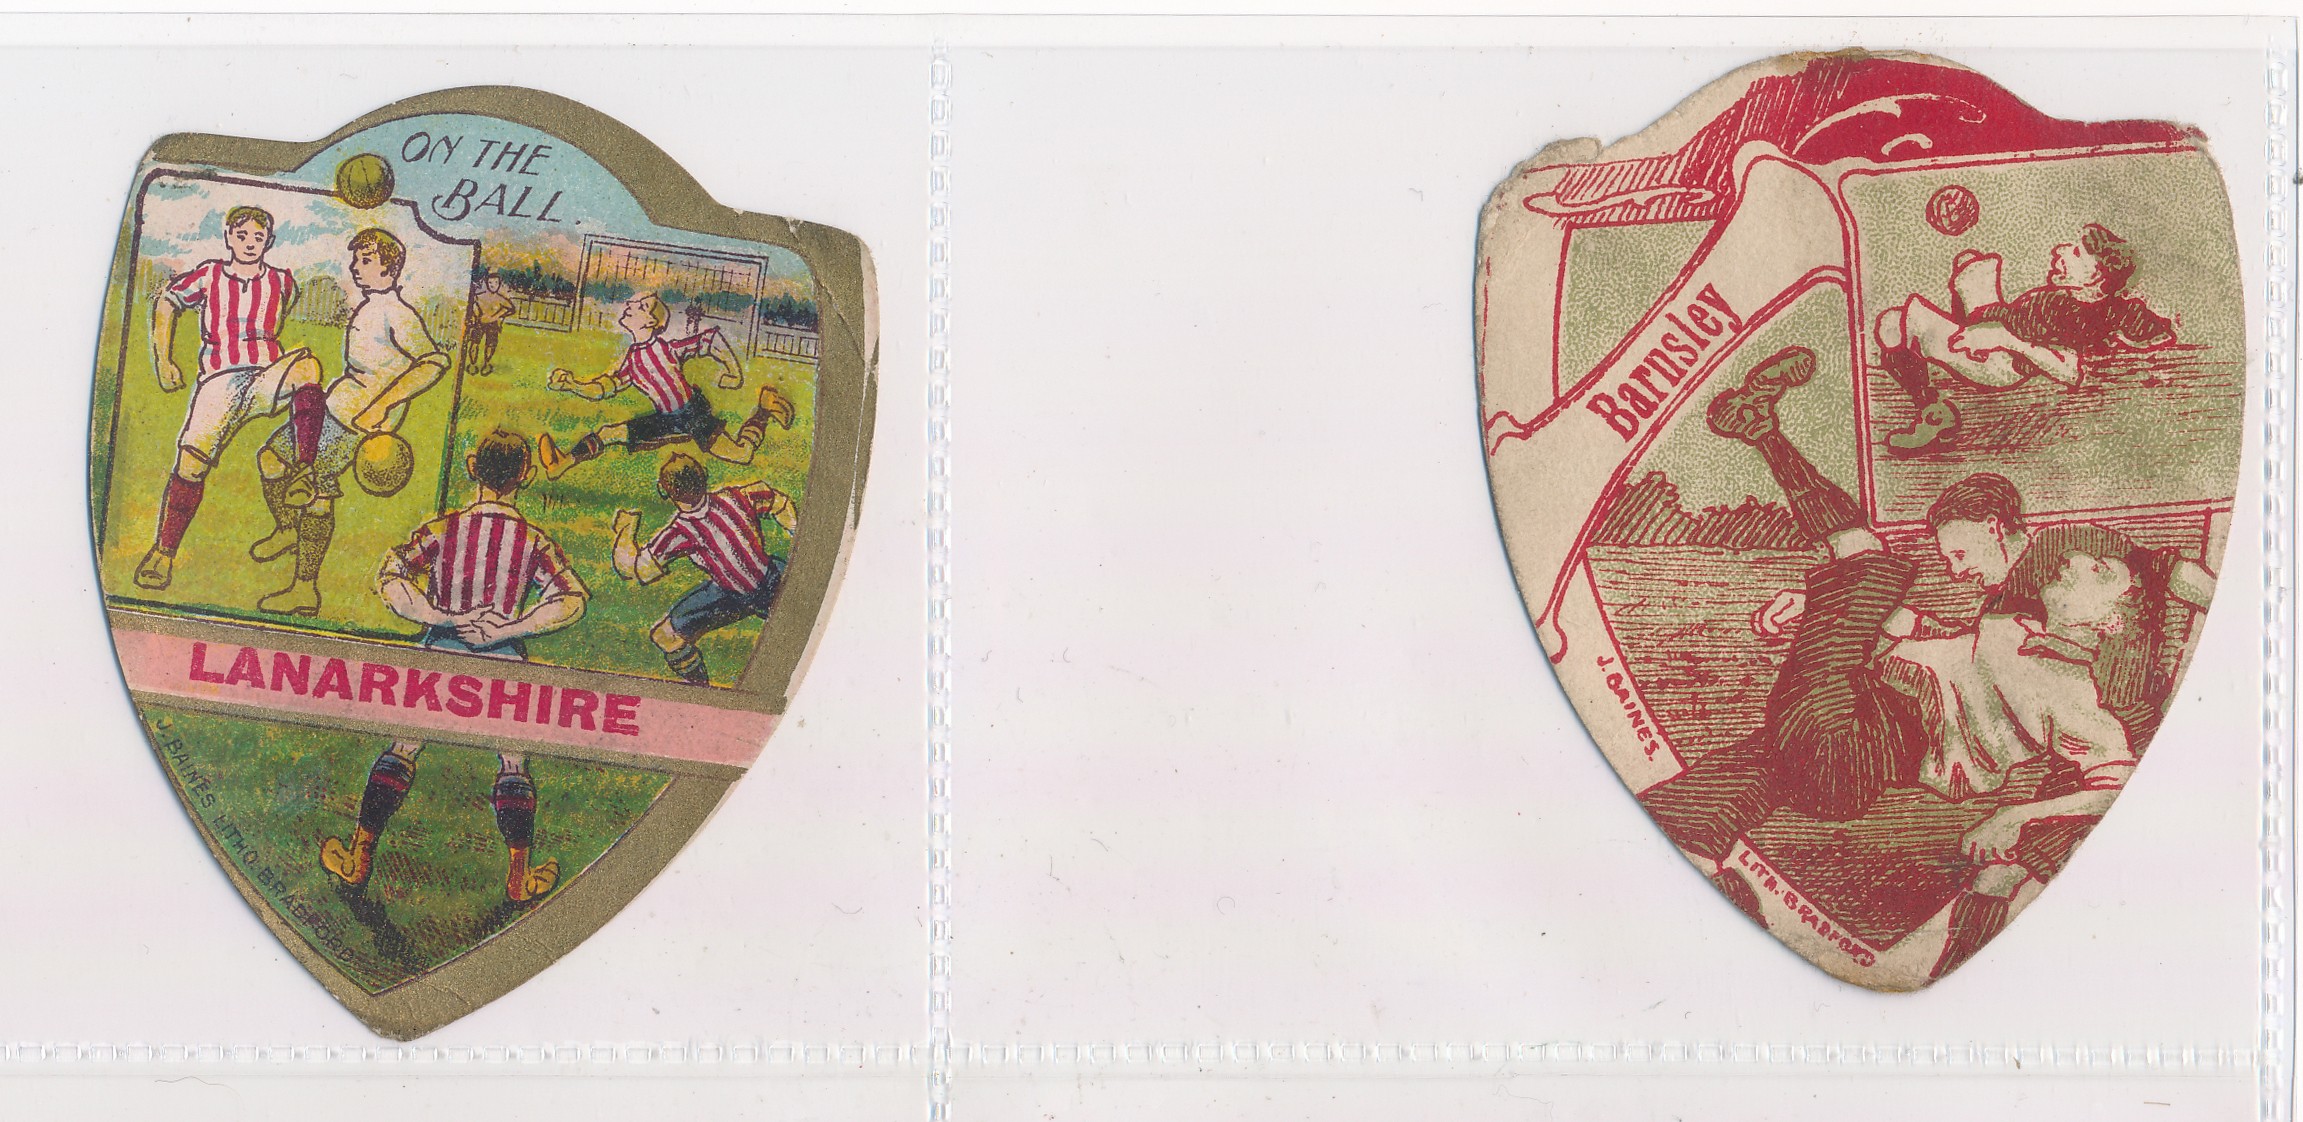 Baines trade cards, Shield shaped Football cards (6) with Lanarkshire, Barnsley, Blackburn Rovers, - Image 3 of 4